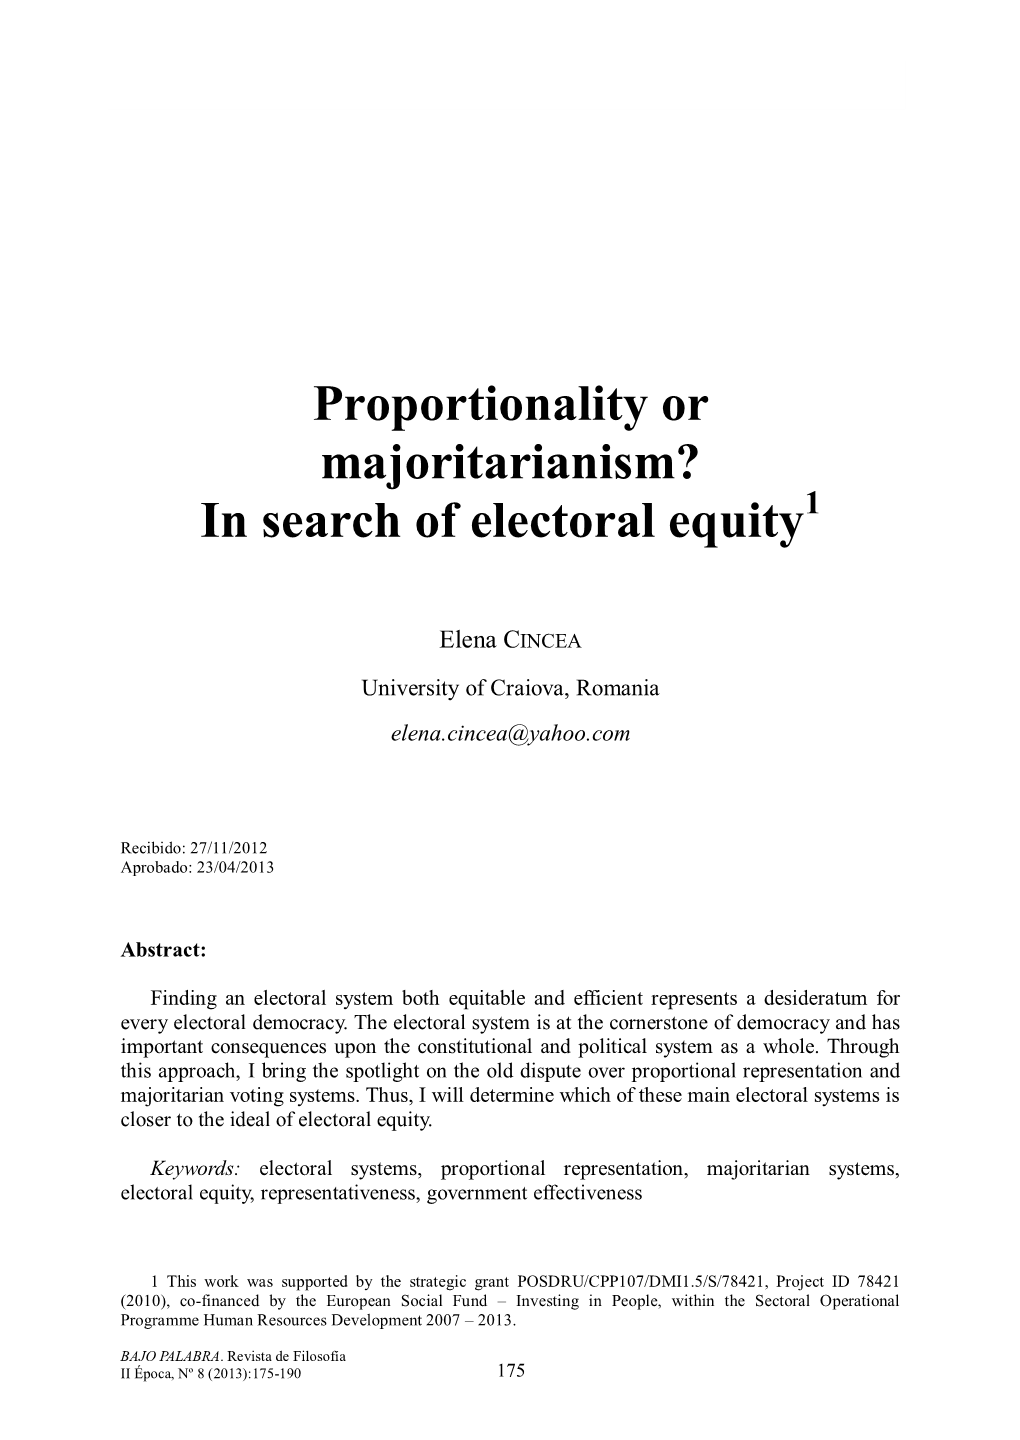 Proportionality Or Majoritarianism? in Search of Electoral Equity1